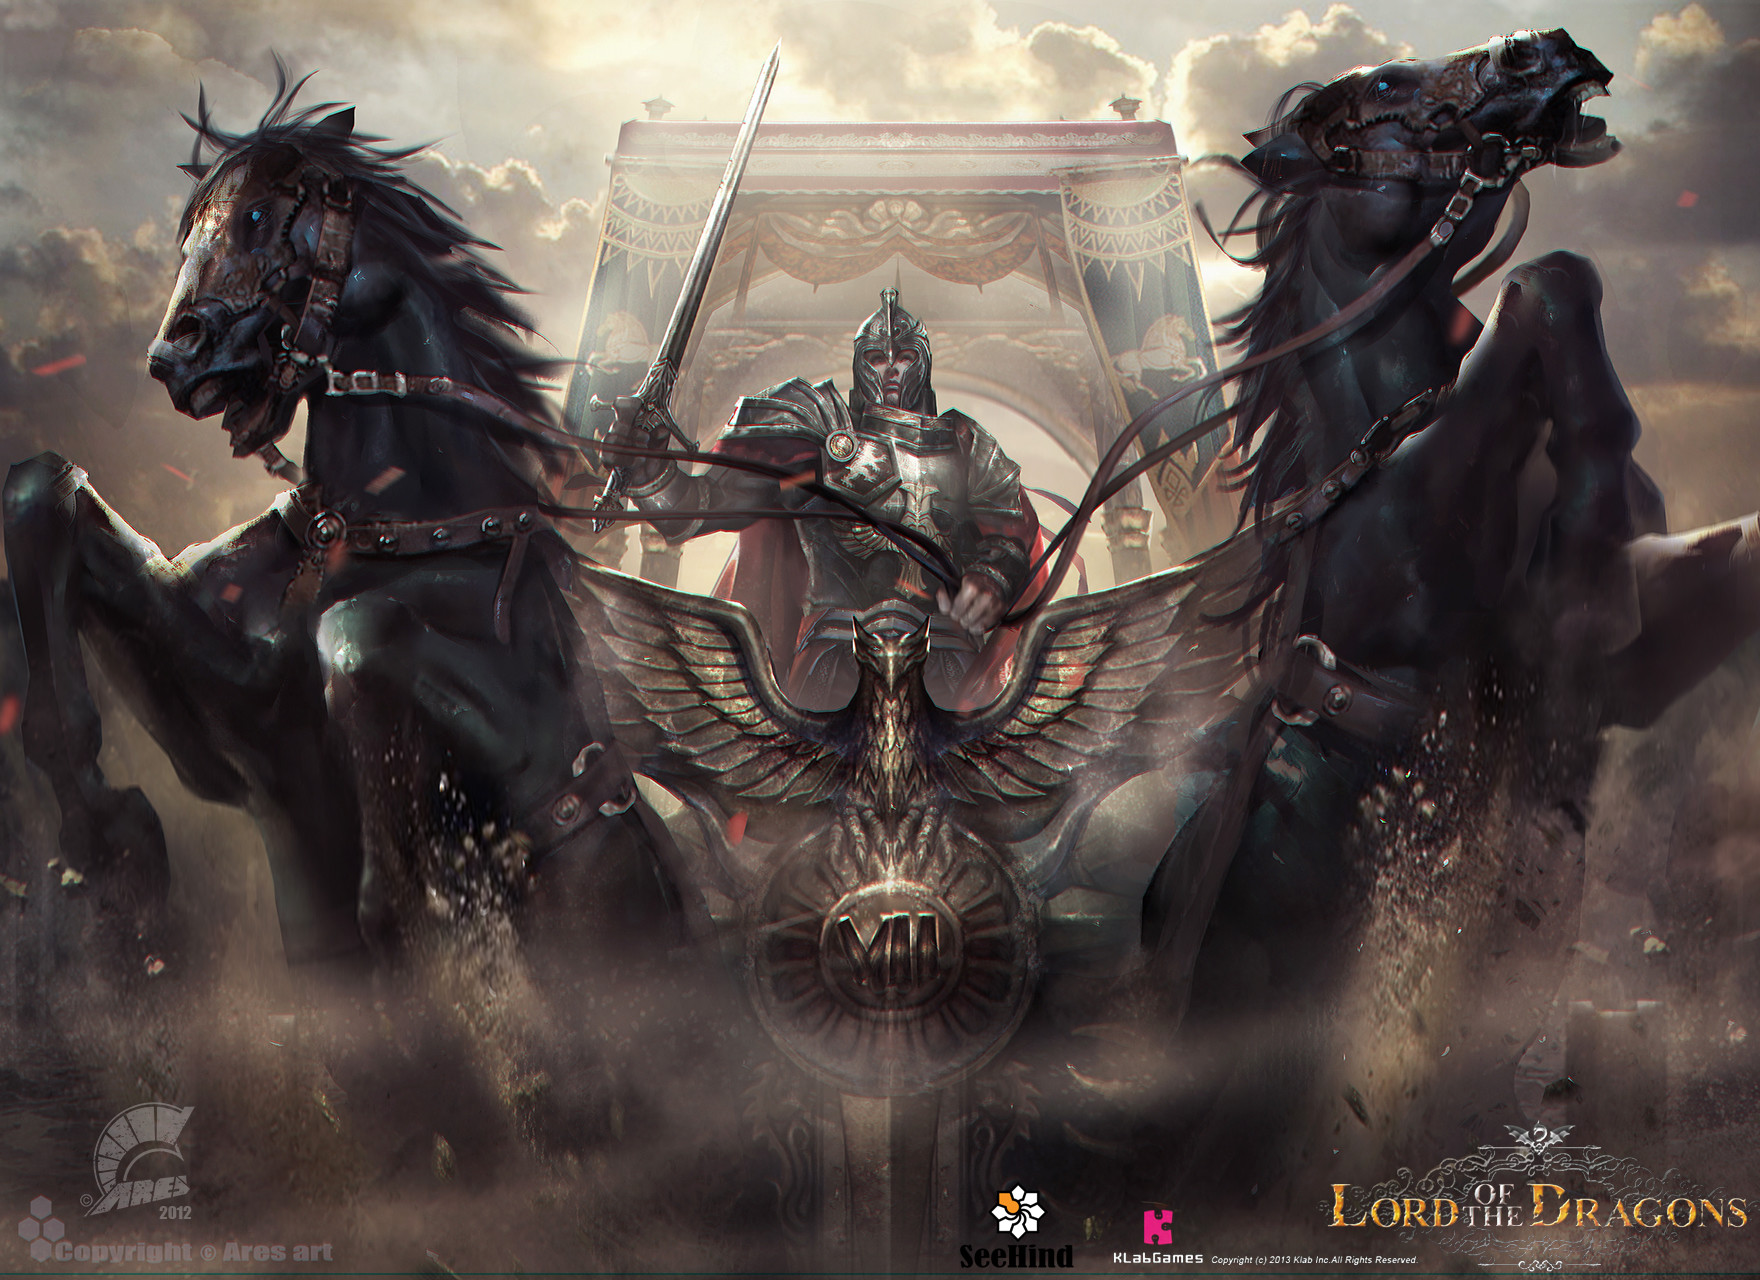 General 1760x1280 drawing Chariot warrior weapon sword armor cape helmet horse wings clouds charge frontal view low-angle gallop video game art video games Ares (artist)